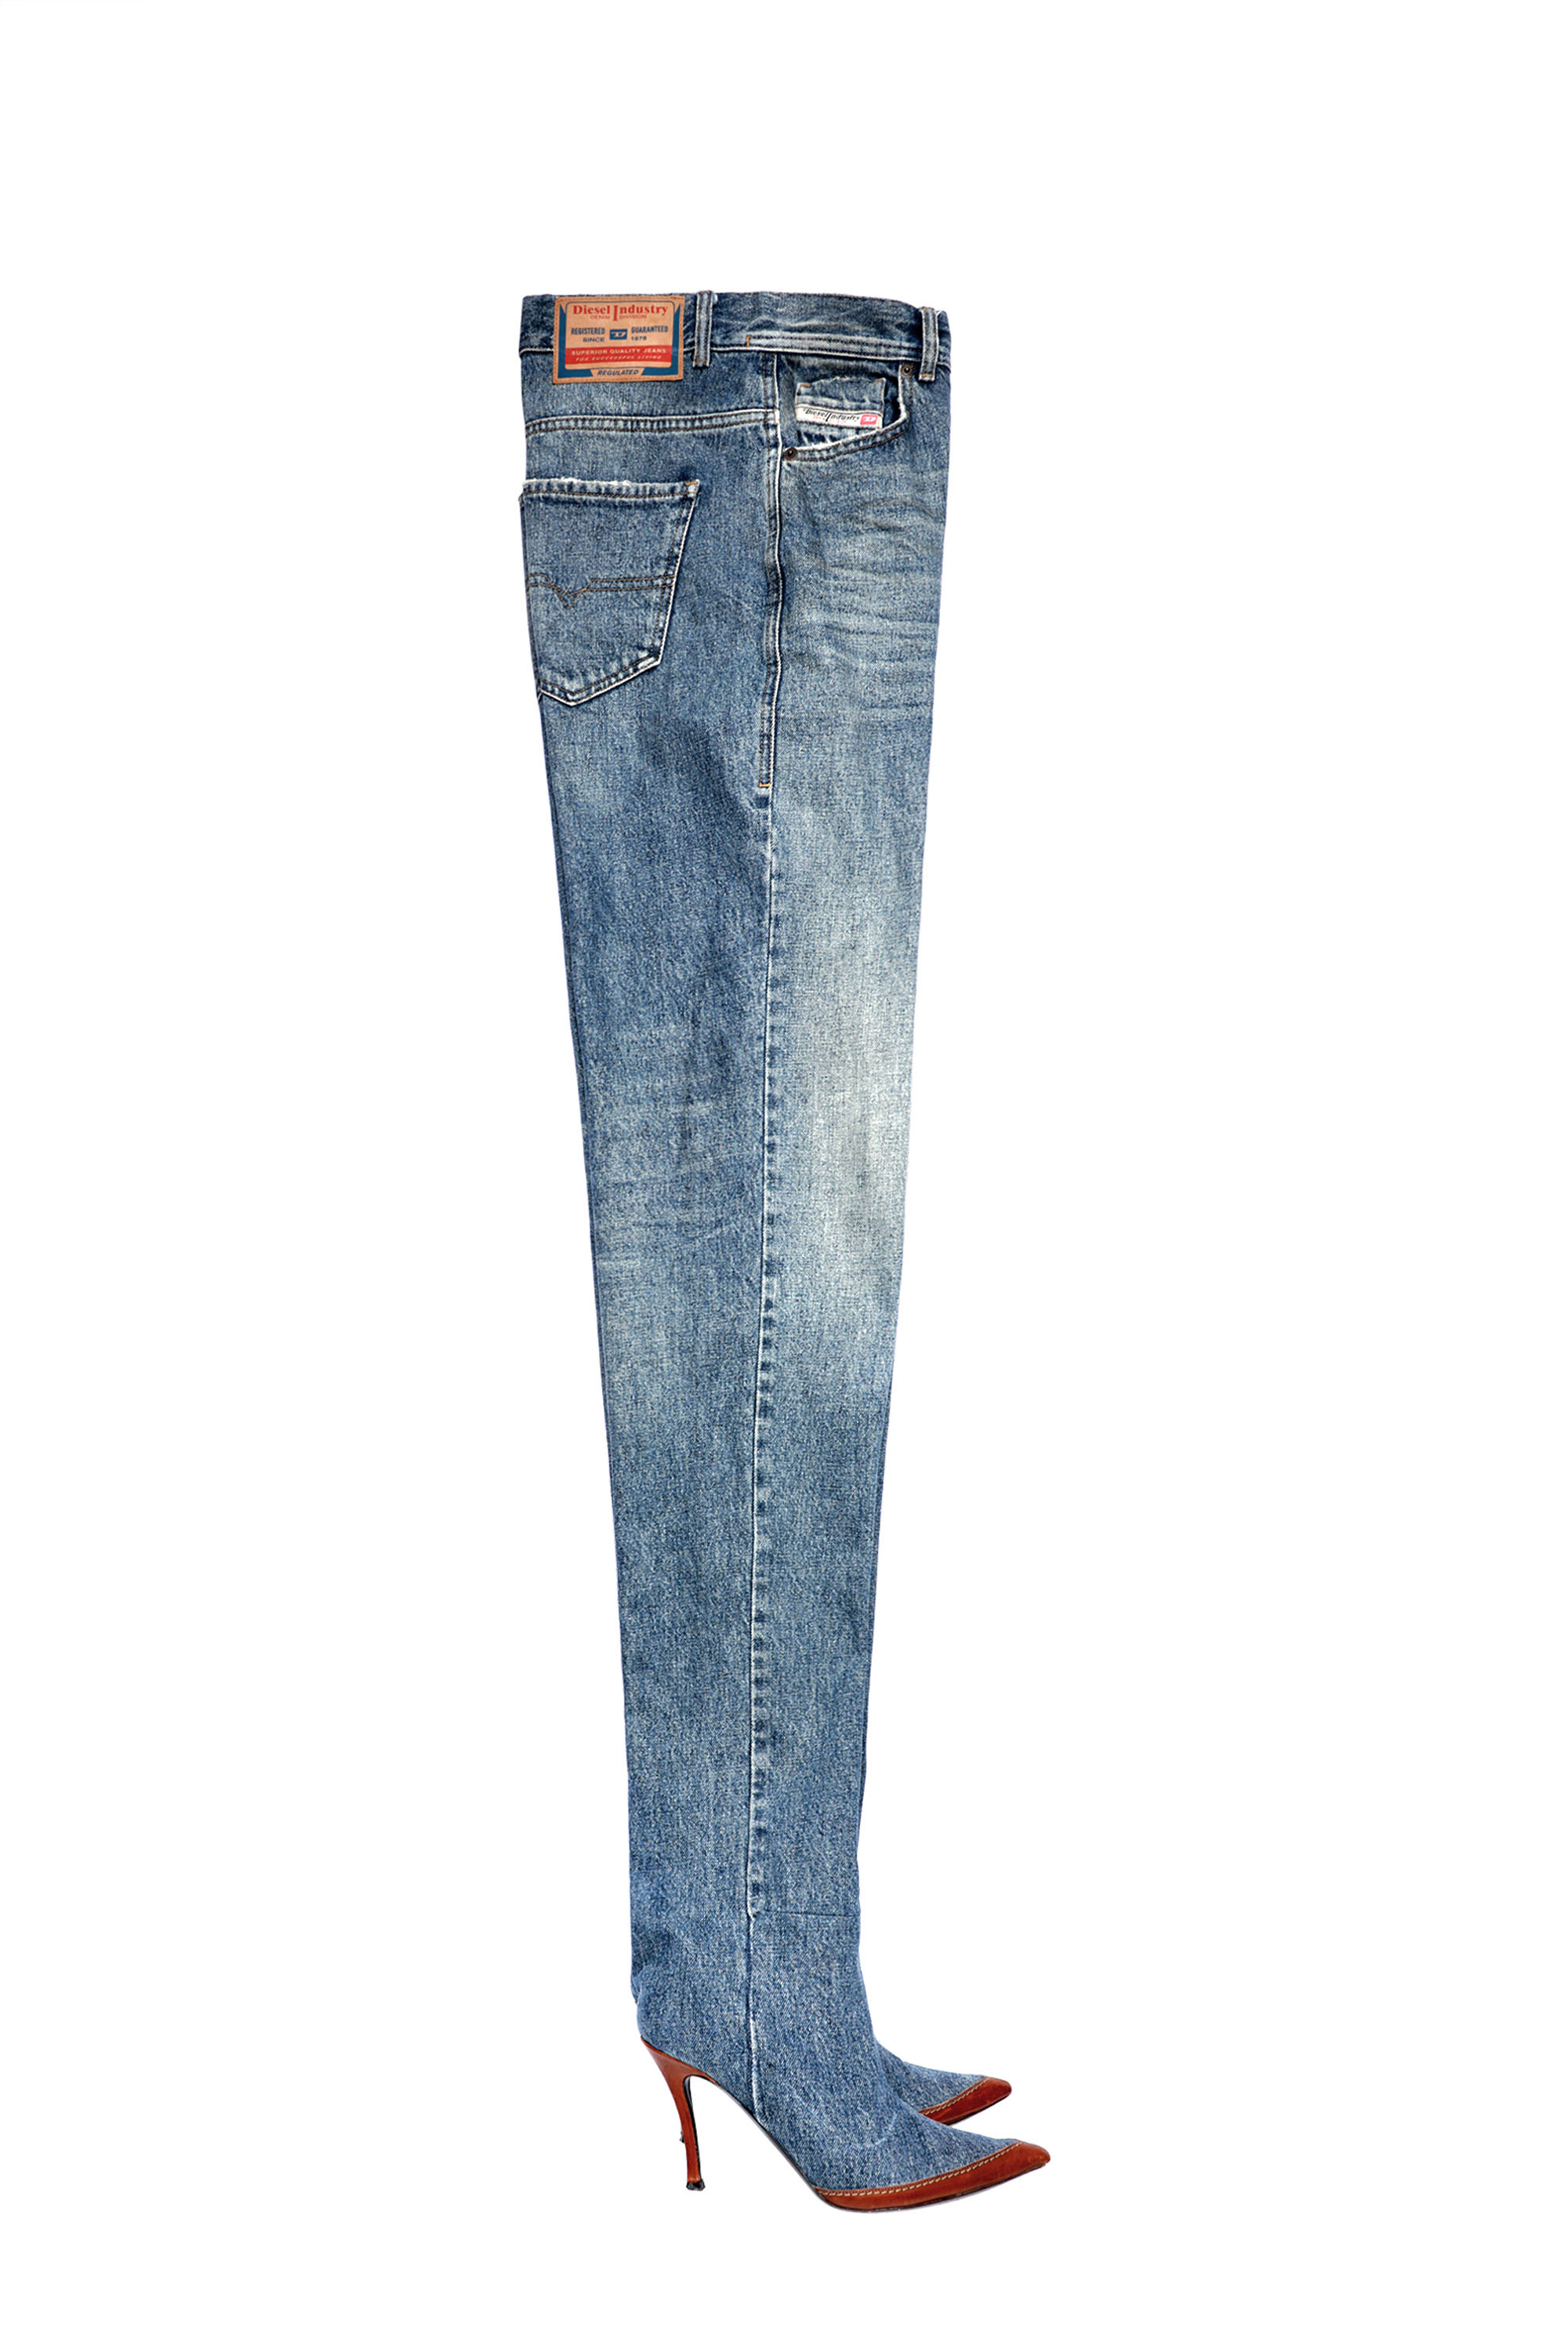 Women's New Arrival Jeans: Skinny, Bootcut, Straight and Bootcut 